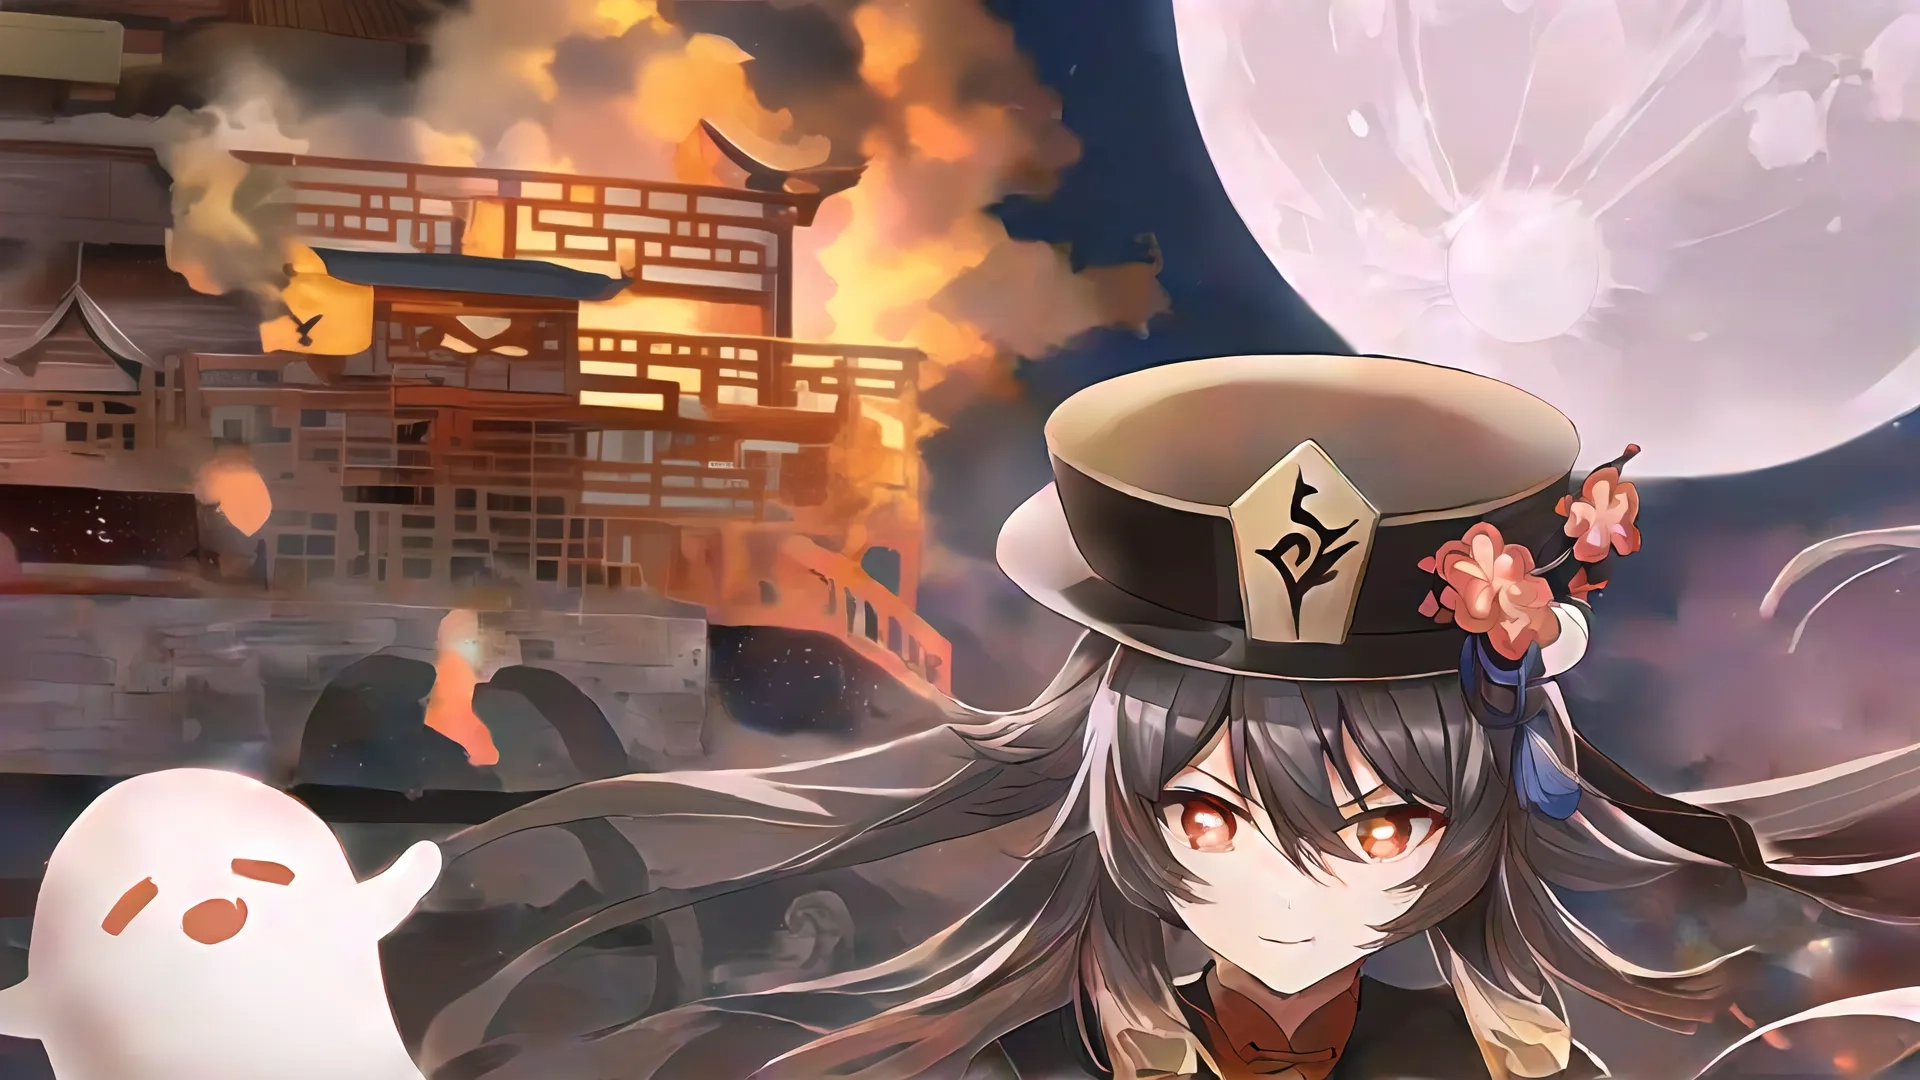 a girl is sitting down with dark hair and a white shirt on her head wearing a hat and surrounded by flames and ghost like objects in the night time
